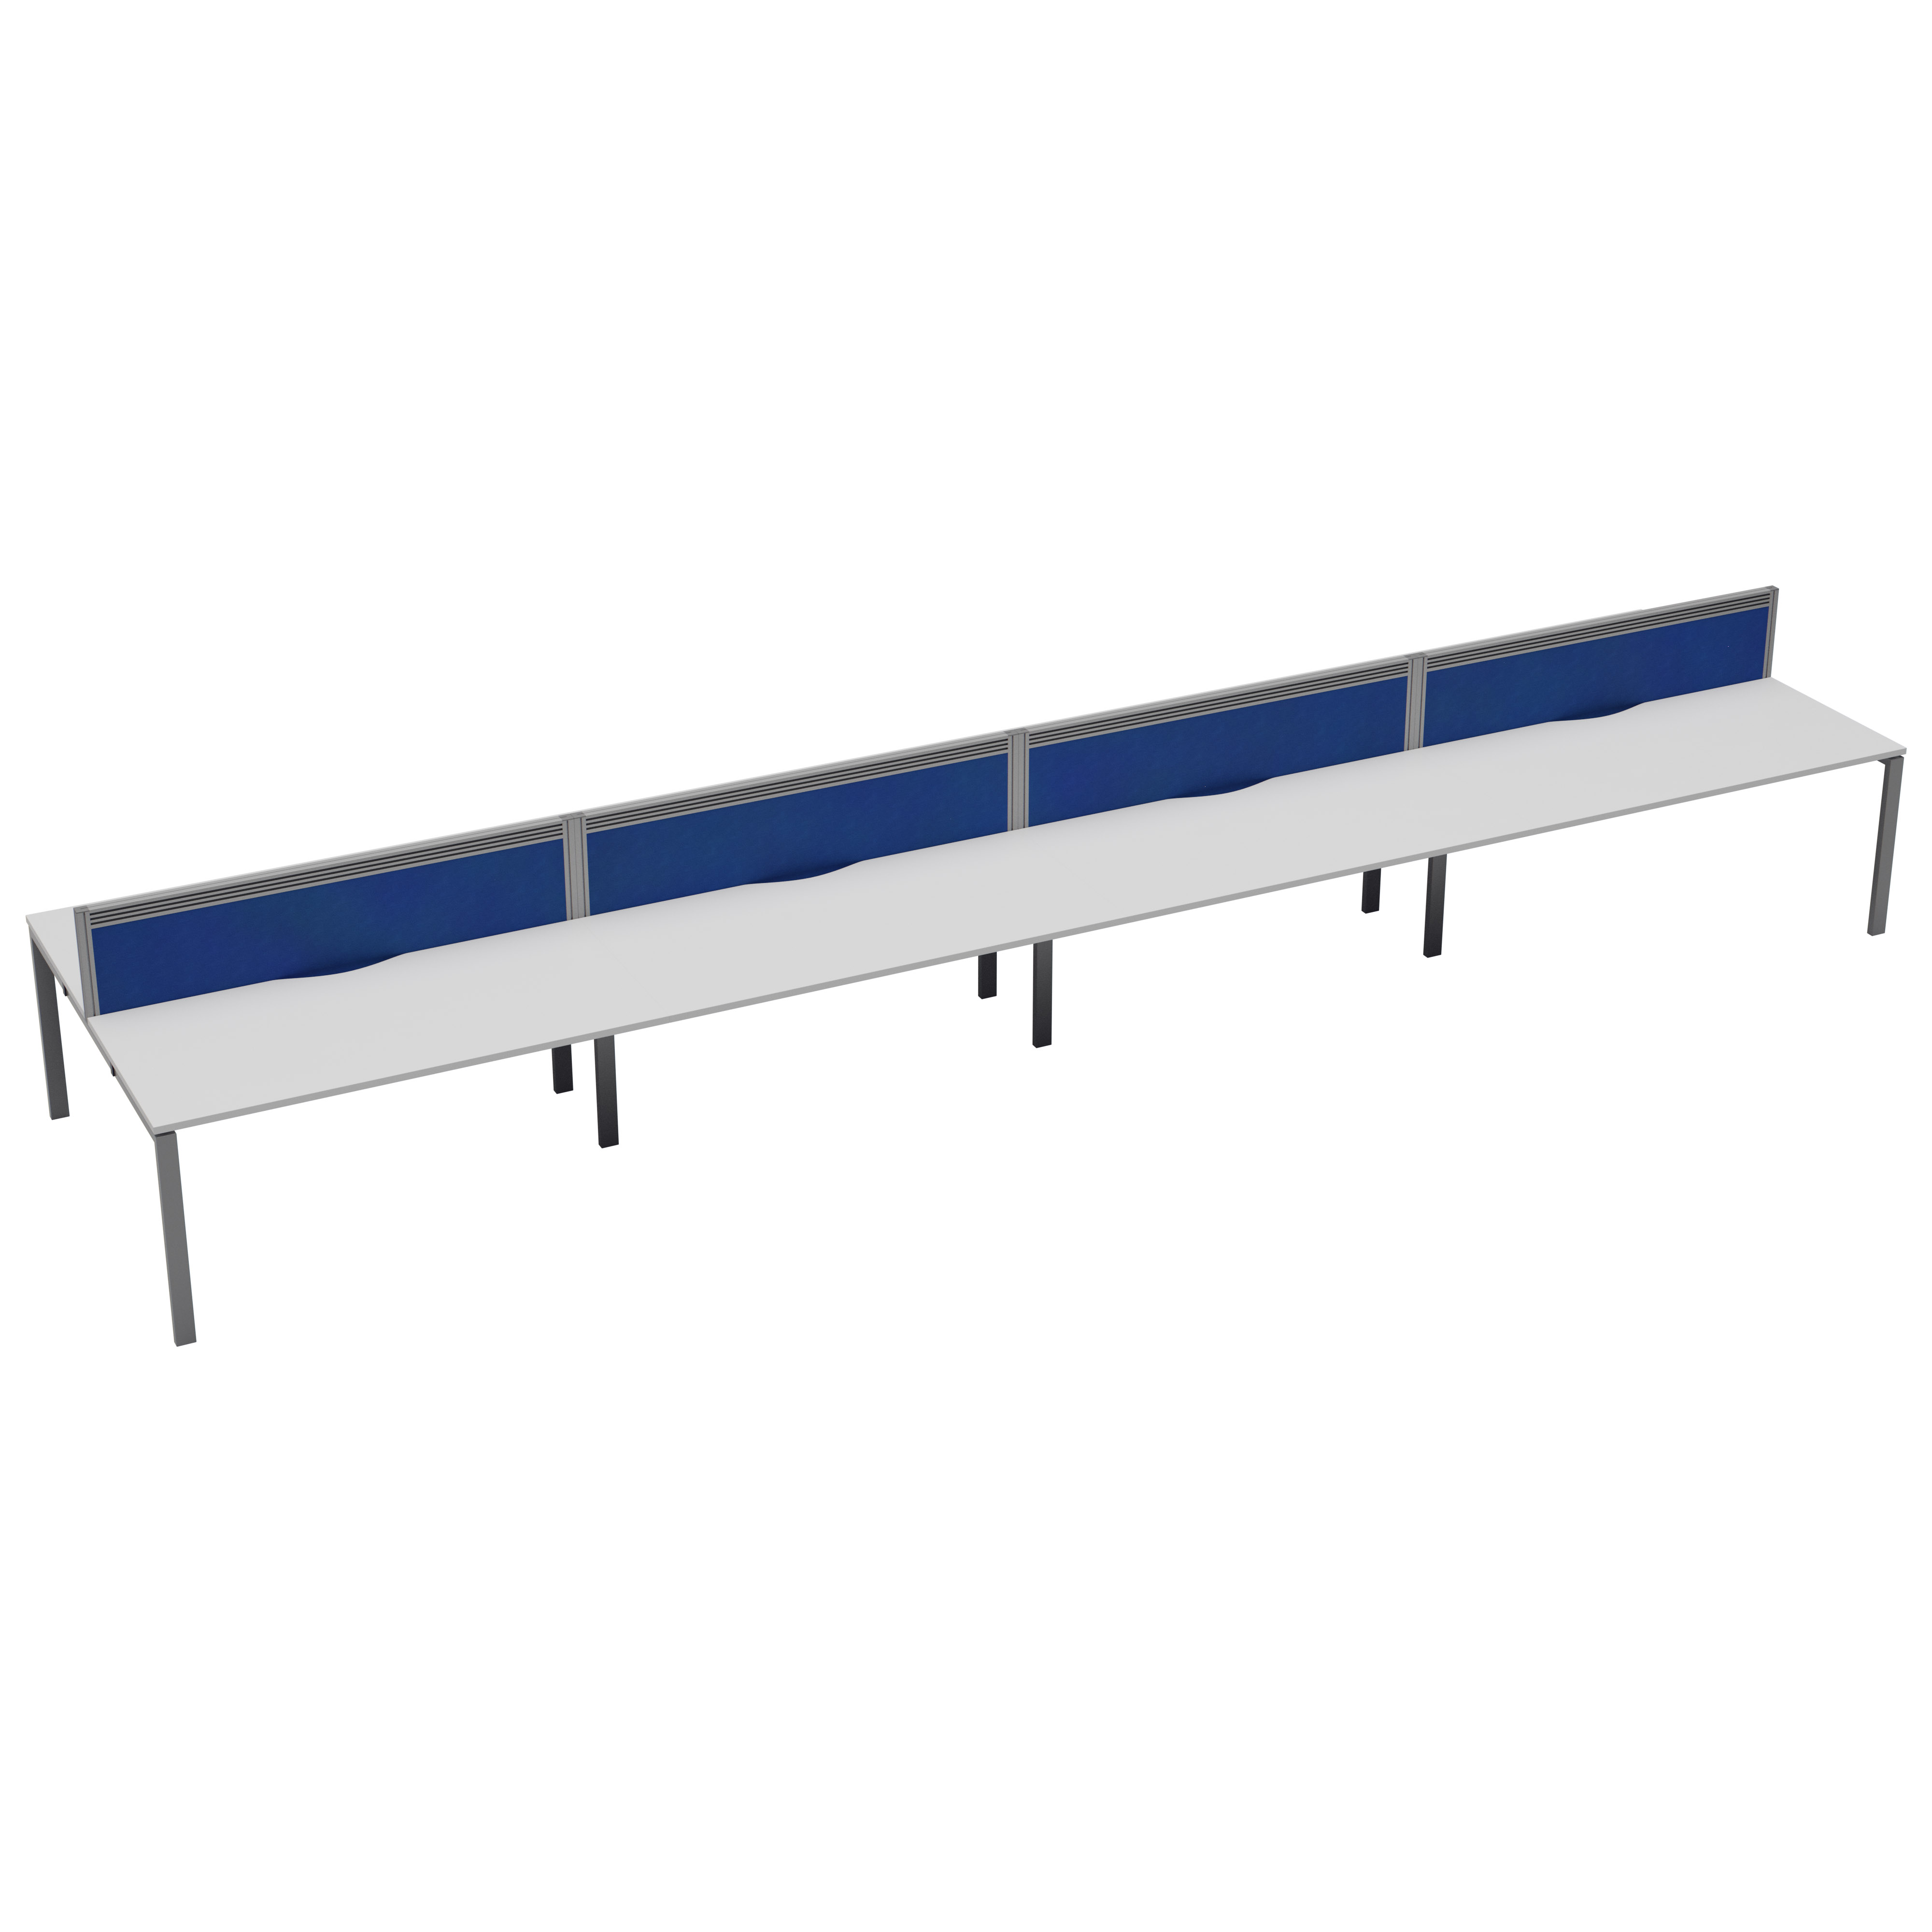 CB 8 Person Bench 1600 x 780 - White Top and Silver Legs